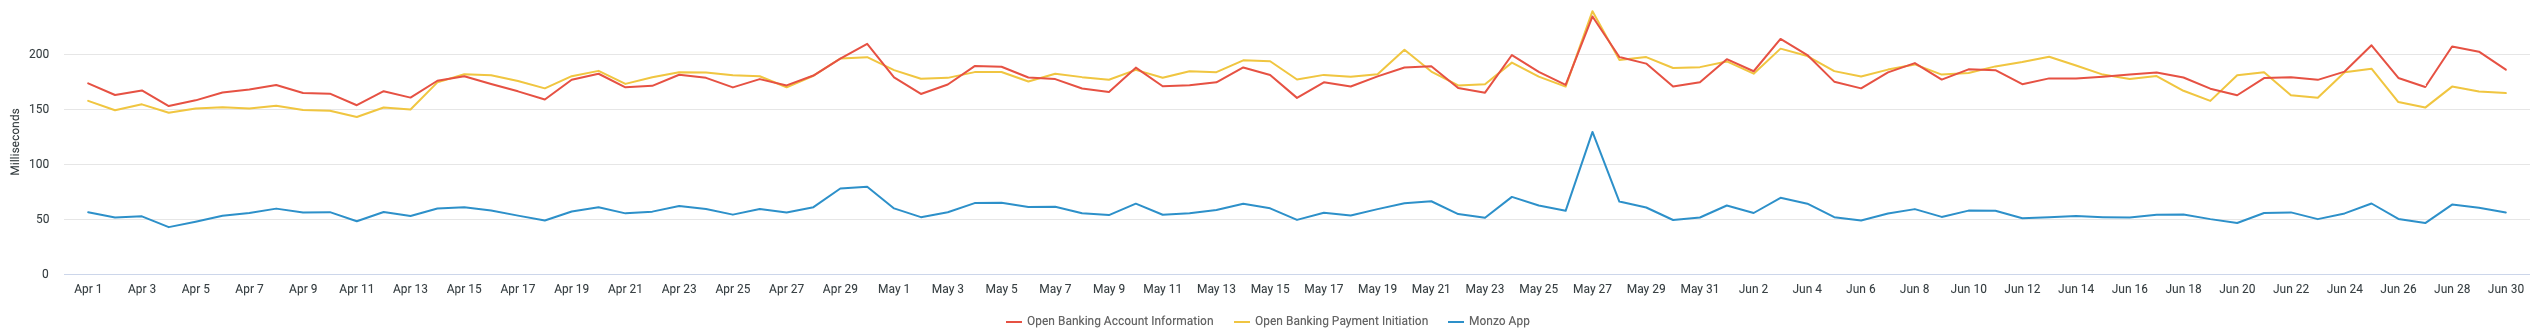 A chart showing the average request times the Monzo App and Open Banking APIs.
                 The data used to generate this chart is included in the table below.